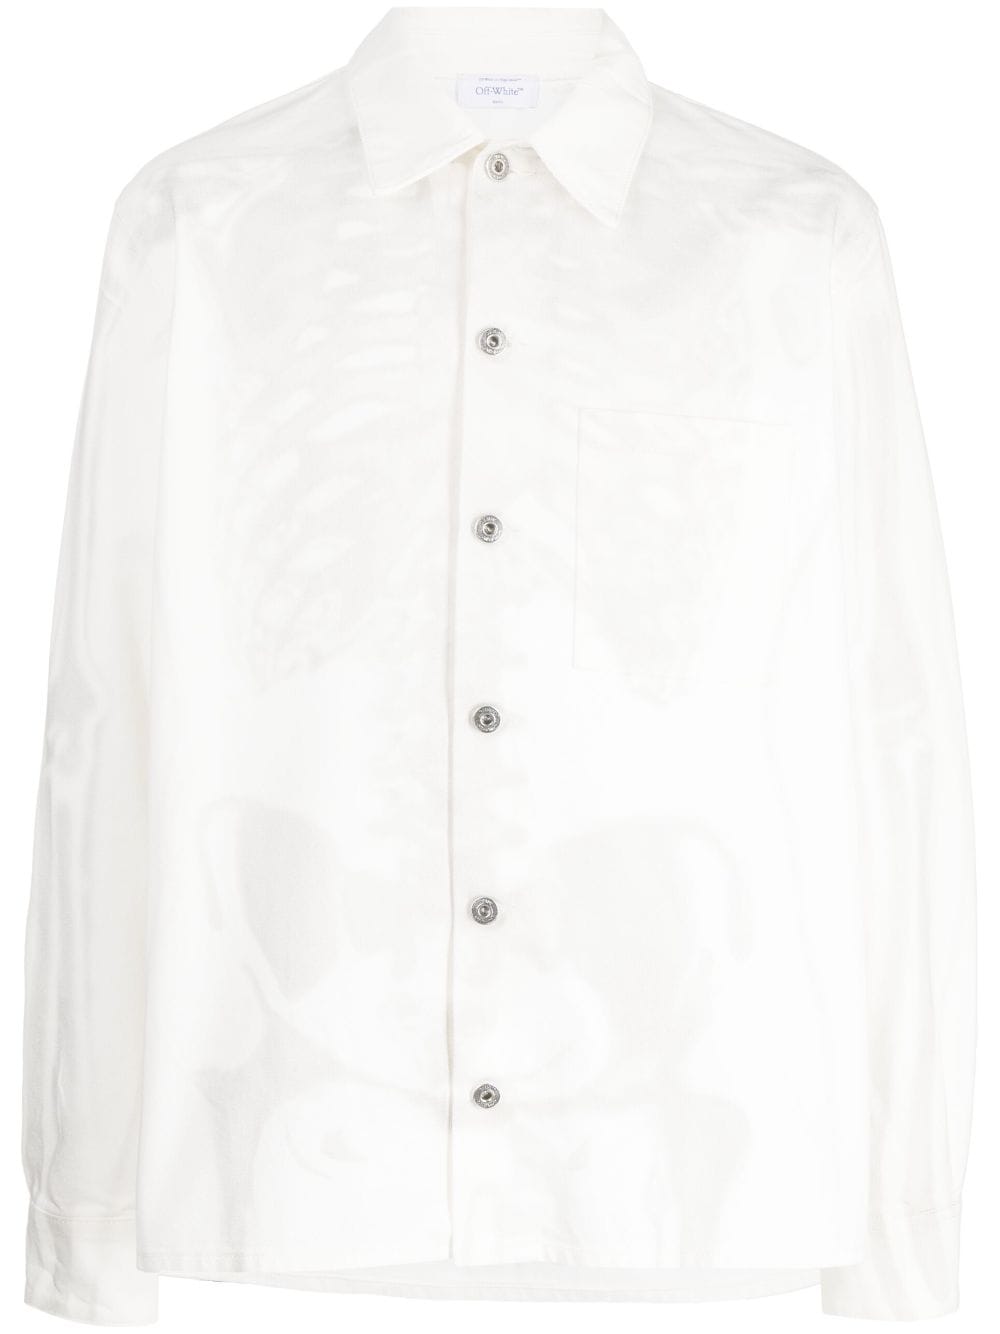 mobil optager Whirlpool Off-White Body Scan long-sleeve Shirt - Farfetch